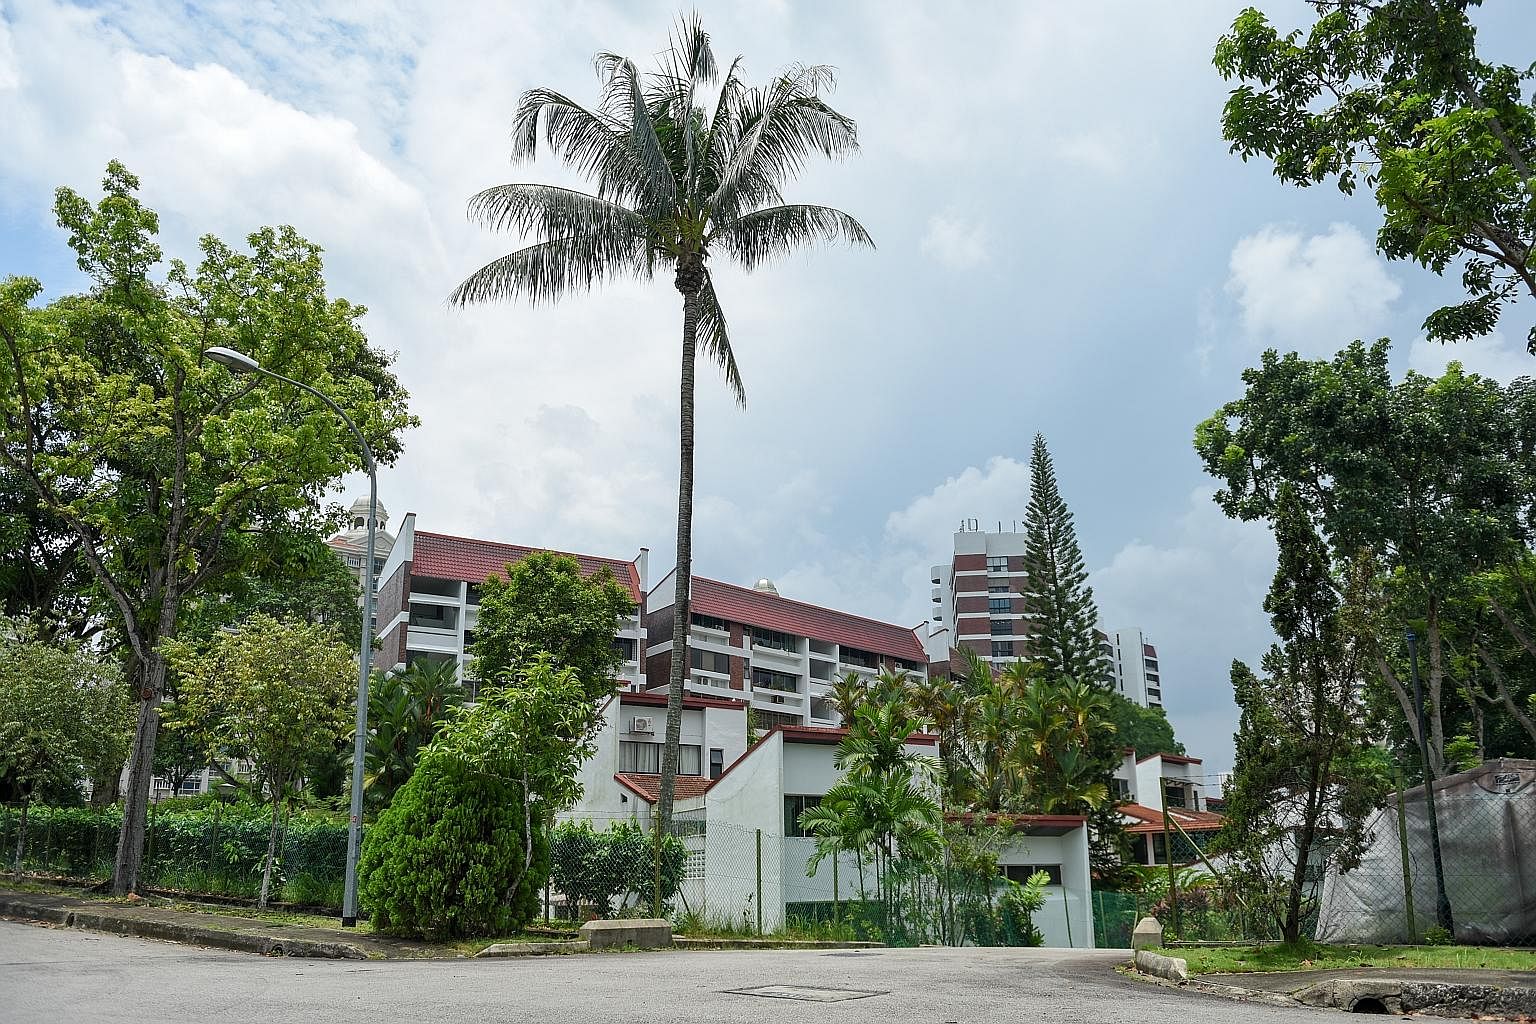 The 236-unit Faber Garden condo, whose $1.18 billion collective sale tender closed without a sale in late May, sits on a 544,738 sq ft site off Upper Thomson Road. ST understands that Faber Garden's collective sale committee is evaluating its options